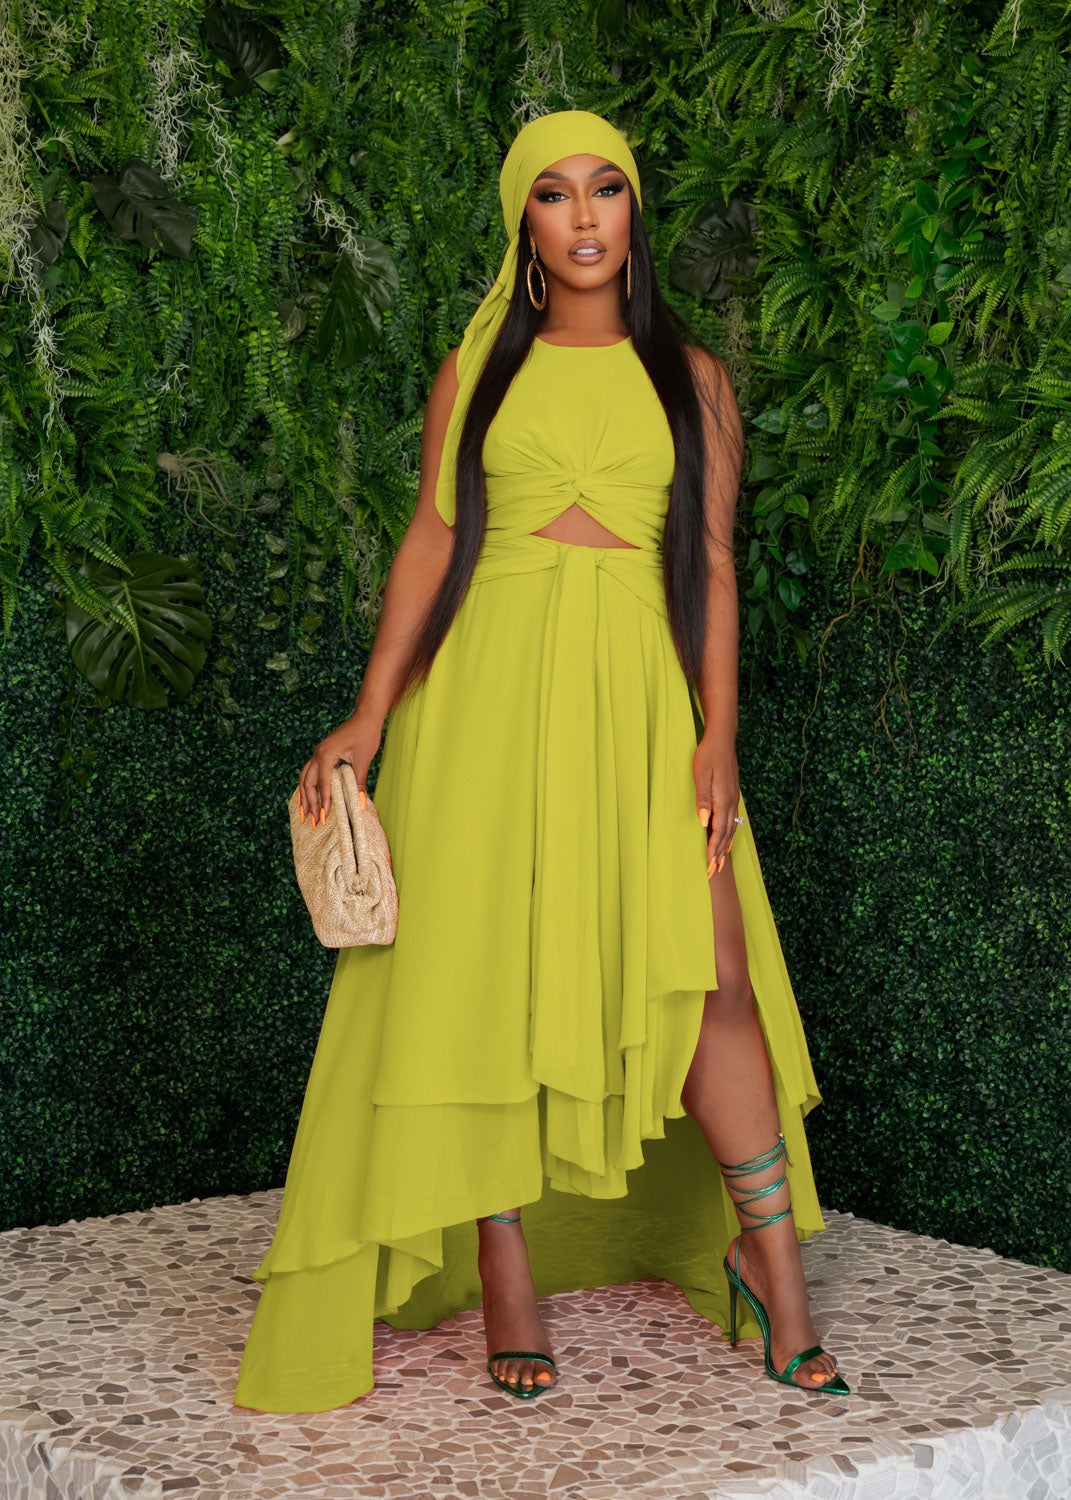 The Most Stylish Items From The Latest Fashion Releases - Essence